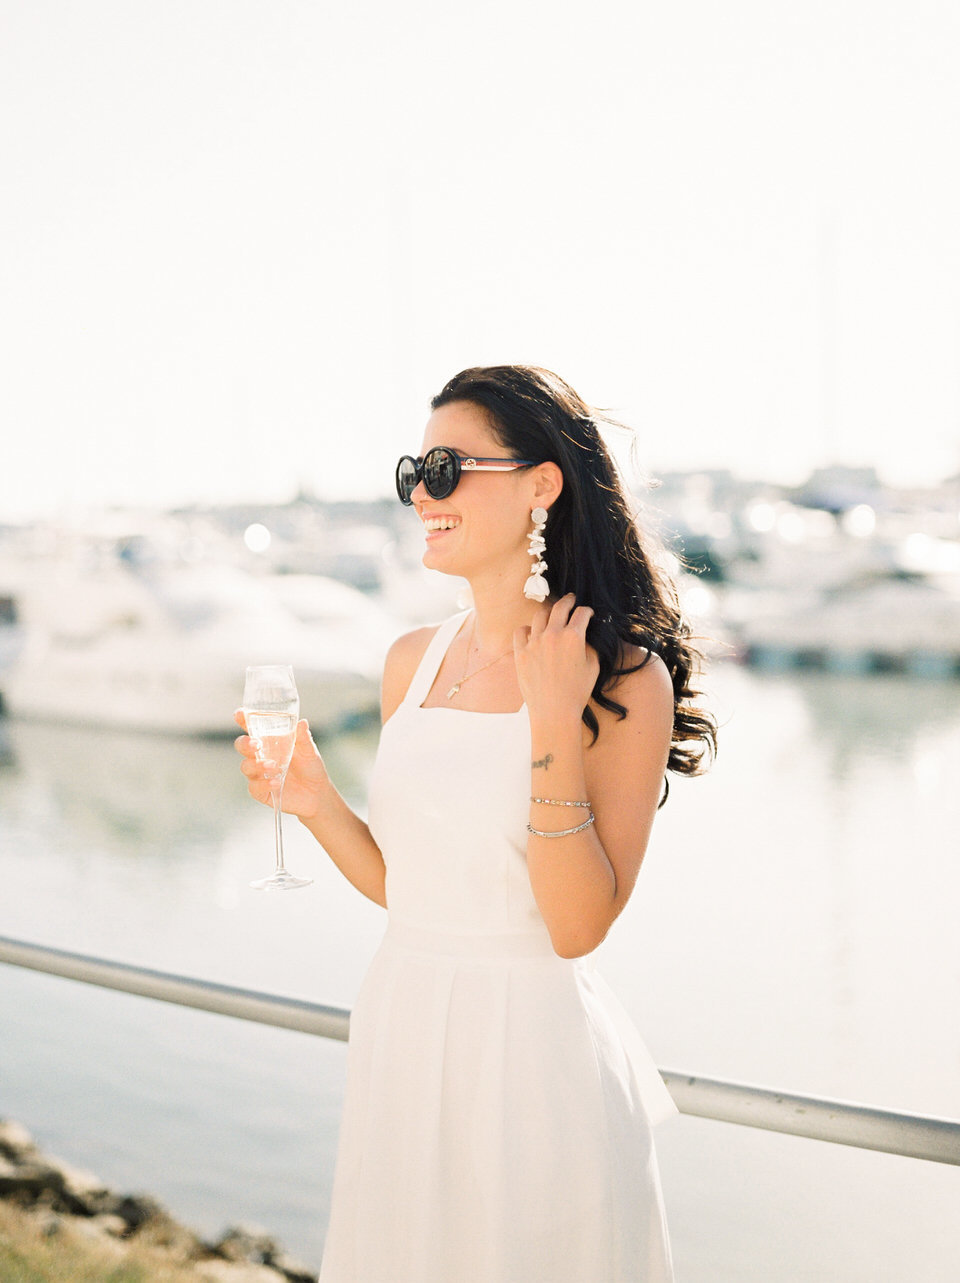 Luxury-Yacht-Engagement-Session-in-Algarve-Portugal-083